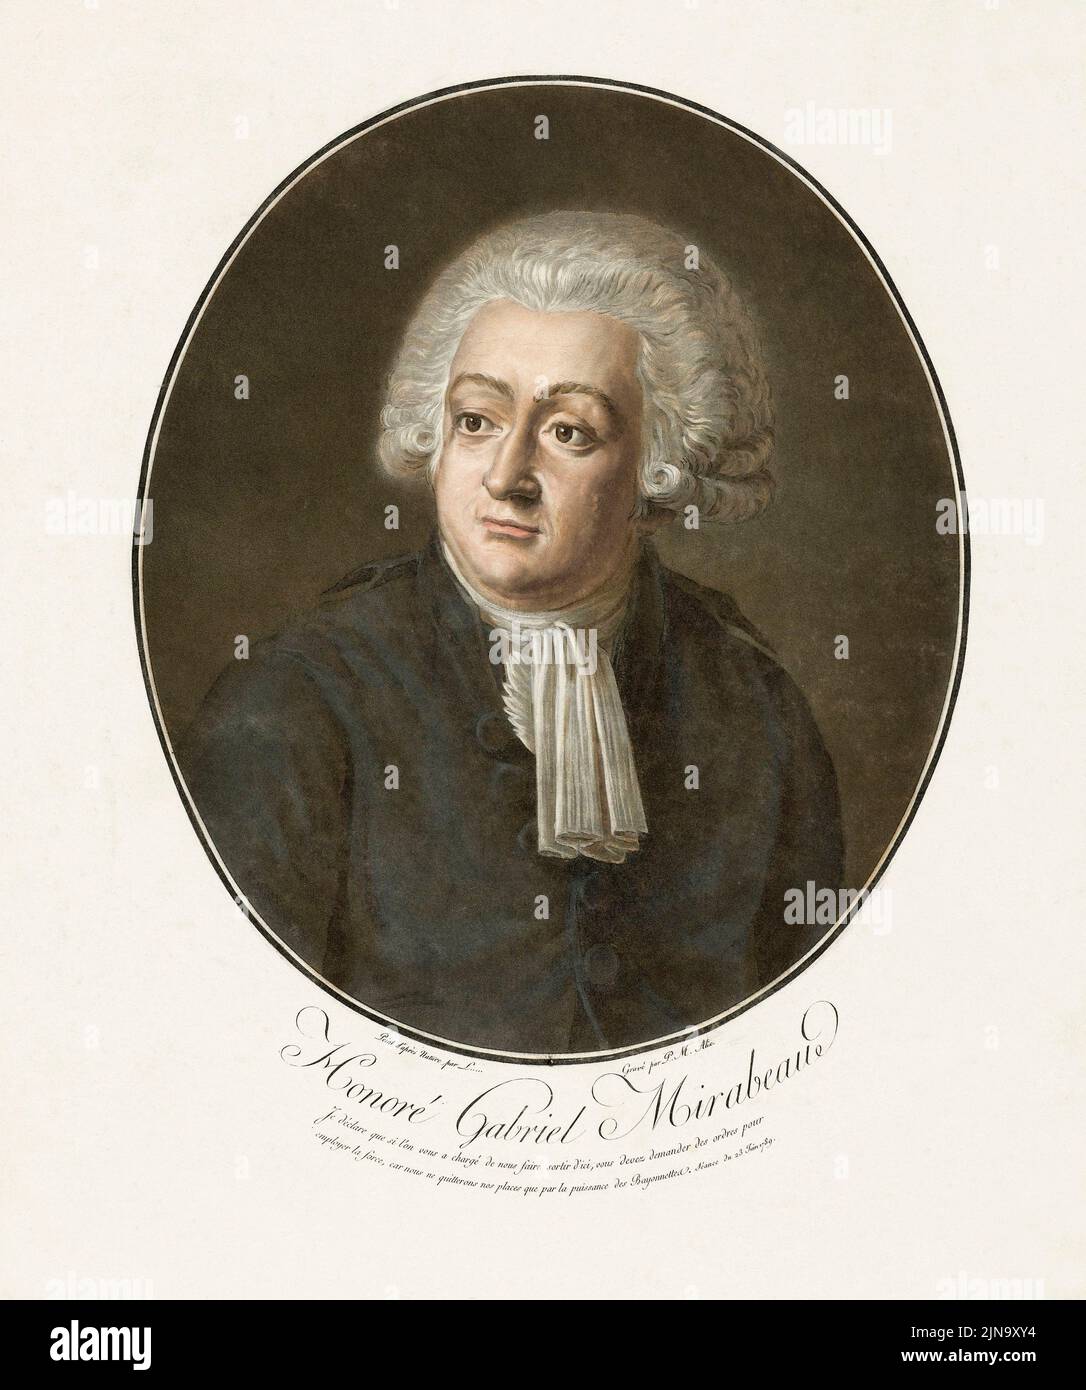 Honoré Gabriel Riqueti Mirabeau, Count of Mirabeau, 1749 -1791.  French revolutionary statesman.  After a late 18th century portait by an anonymous artist. Stock Photo